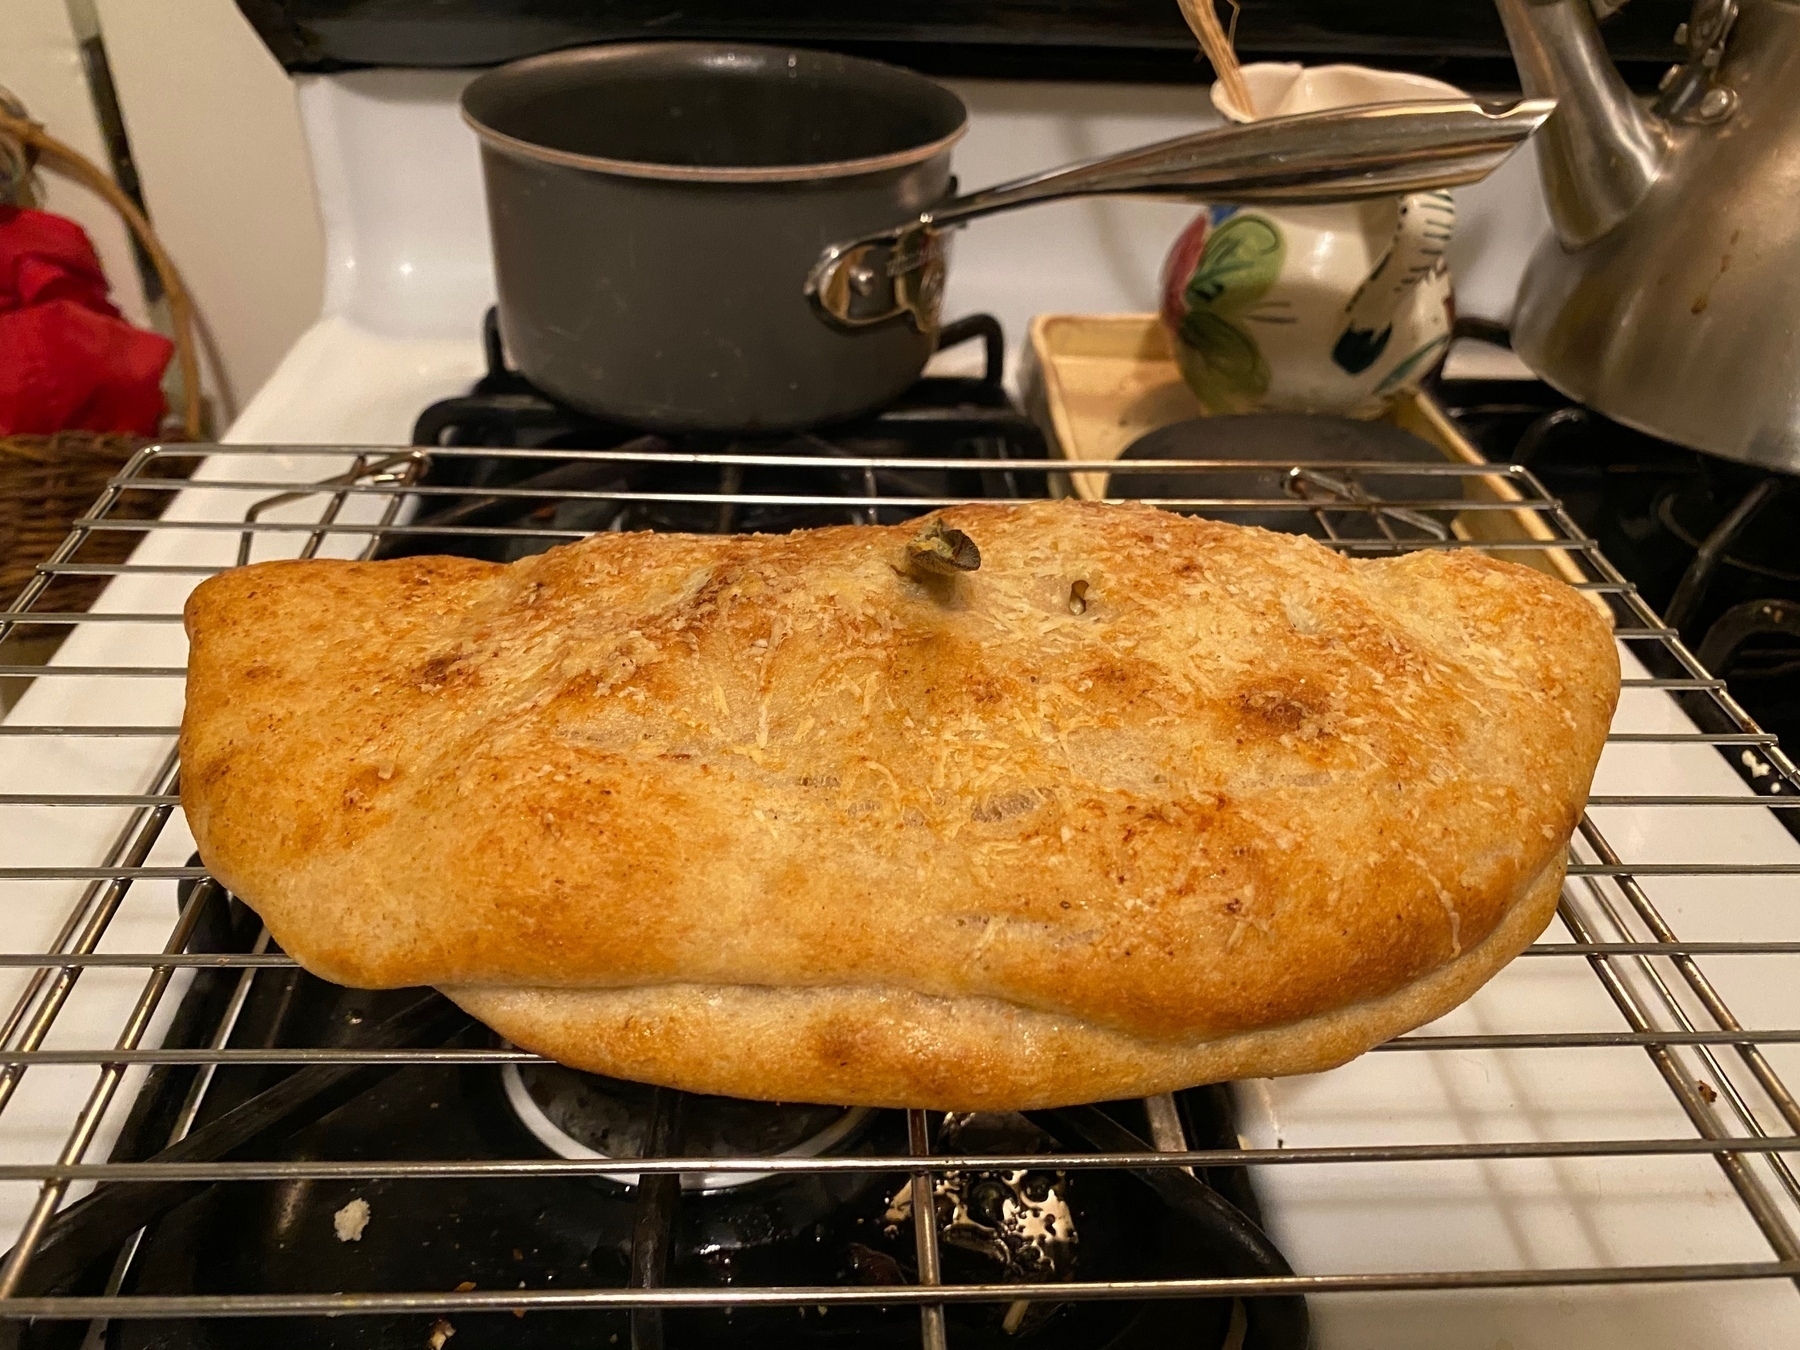 A small calzone on a cooling rack on top of a stove.